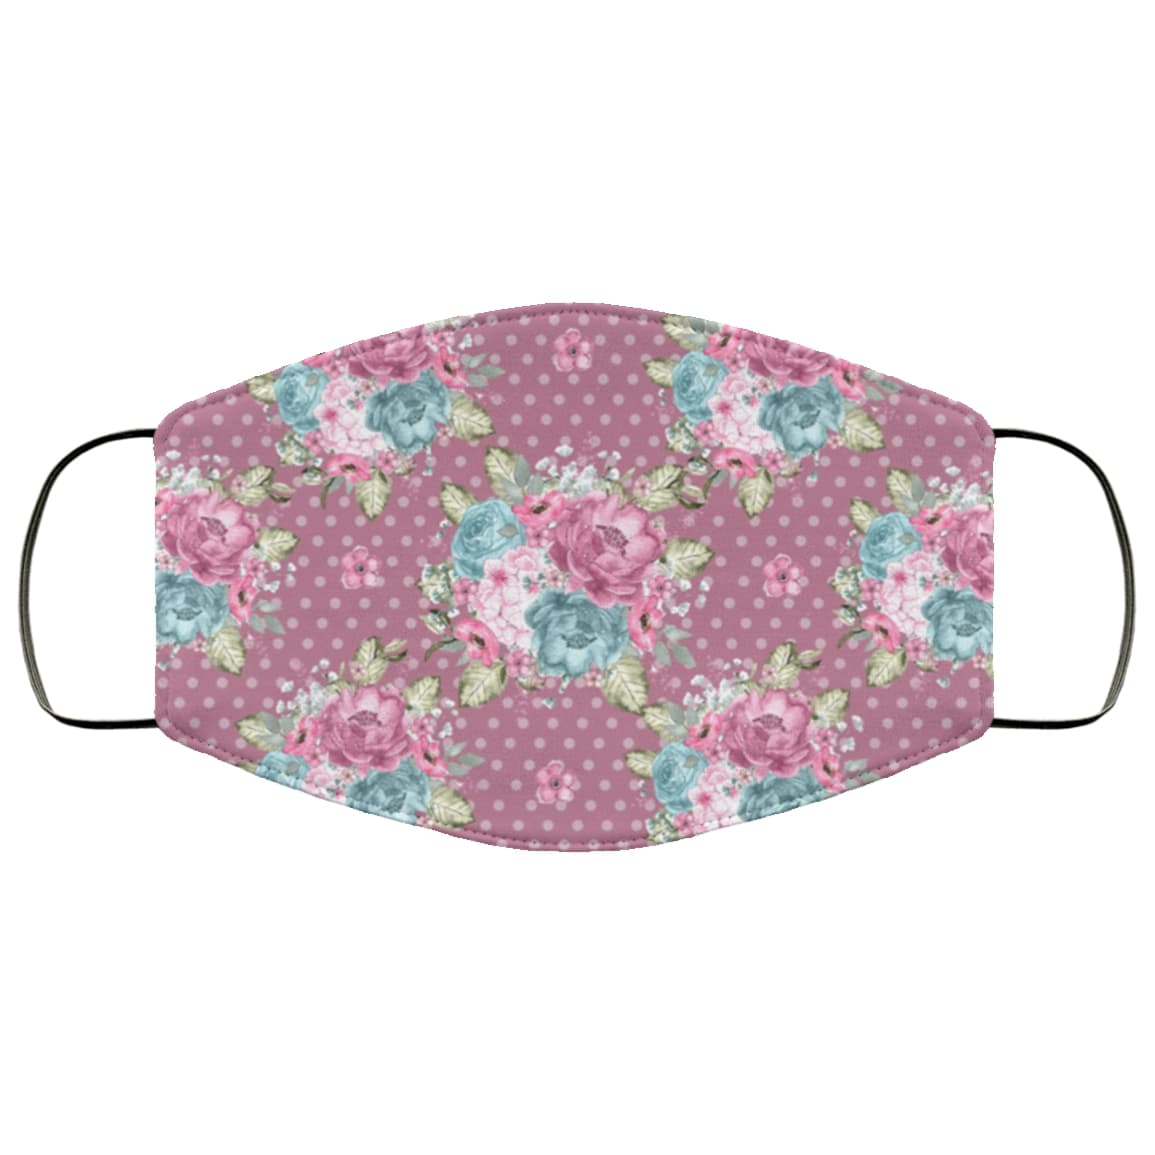 Dreams floral flowers full over printed face mask 1